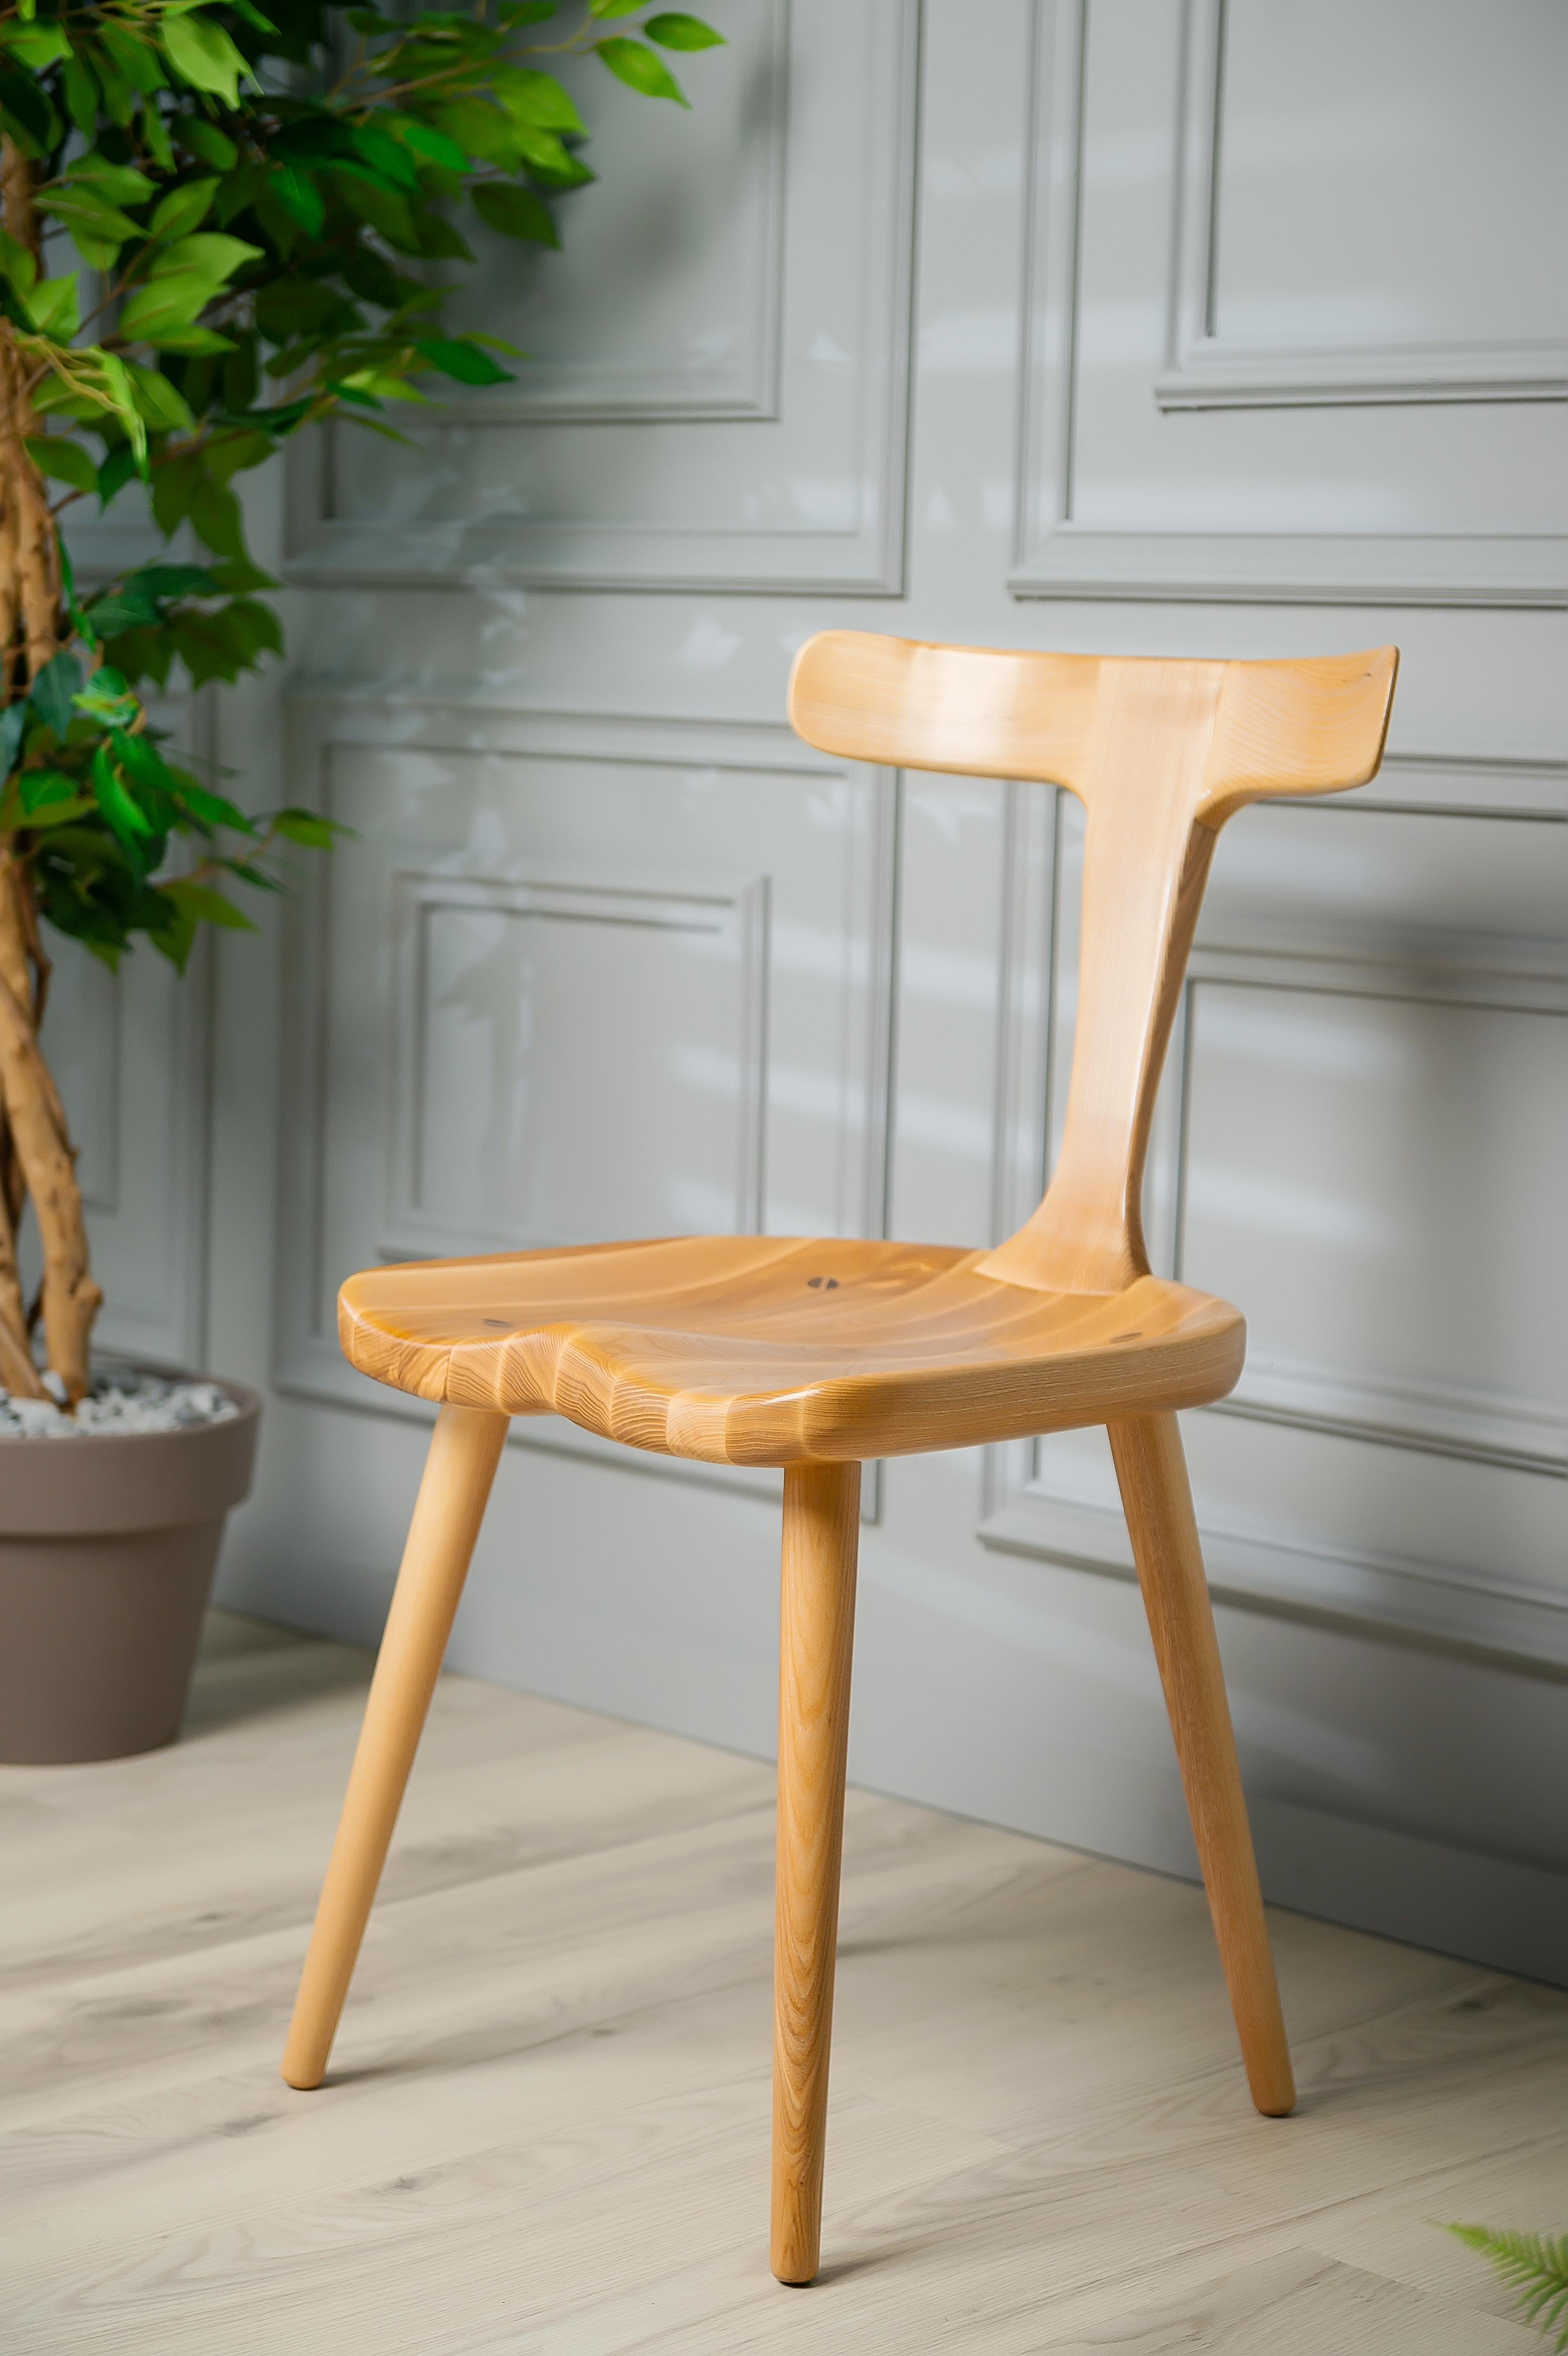 With a one of a kind design, our Anvil dining chairs offer the most simple elegance for a casual dining experience. With a custom stain, these chairs will offer plenty for comfort and style.
Dimensions
17.3